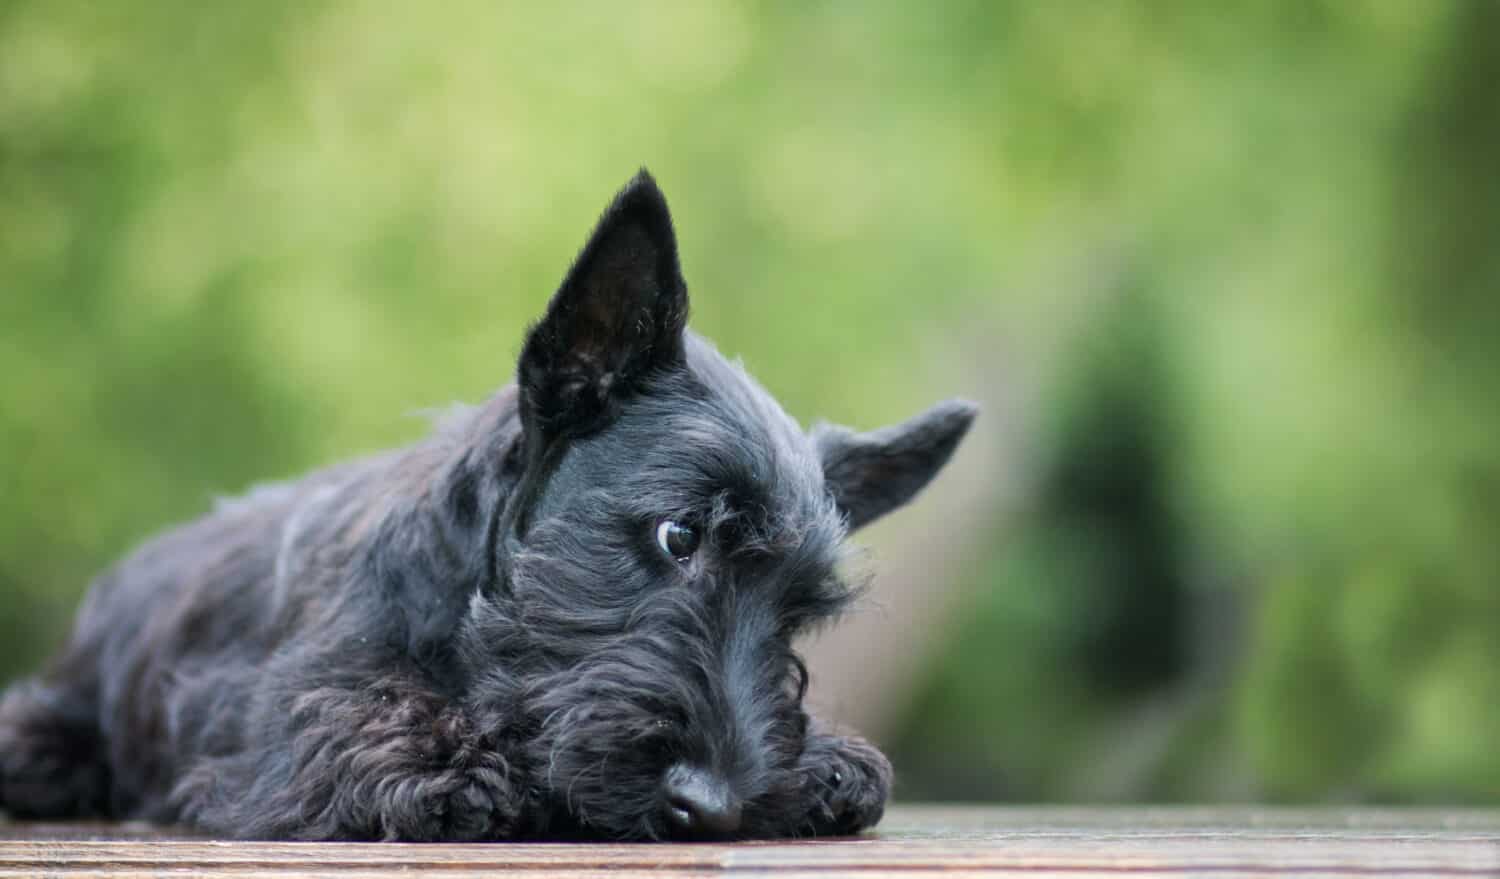 Black scottish terrier puppy posing outside at summer. Young and cute terrier baby.